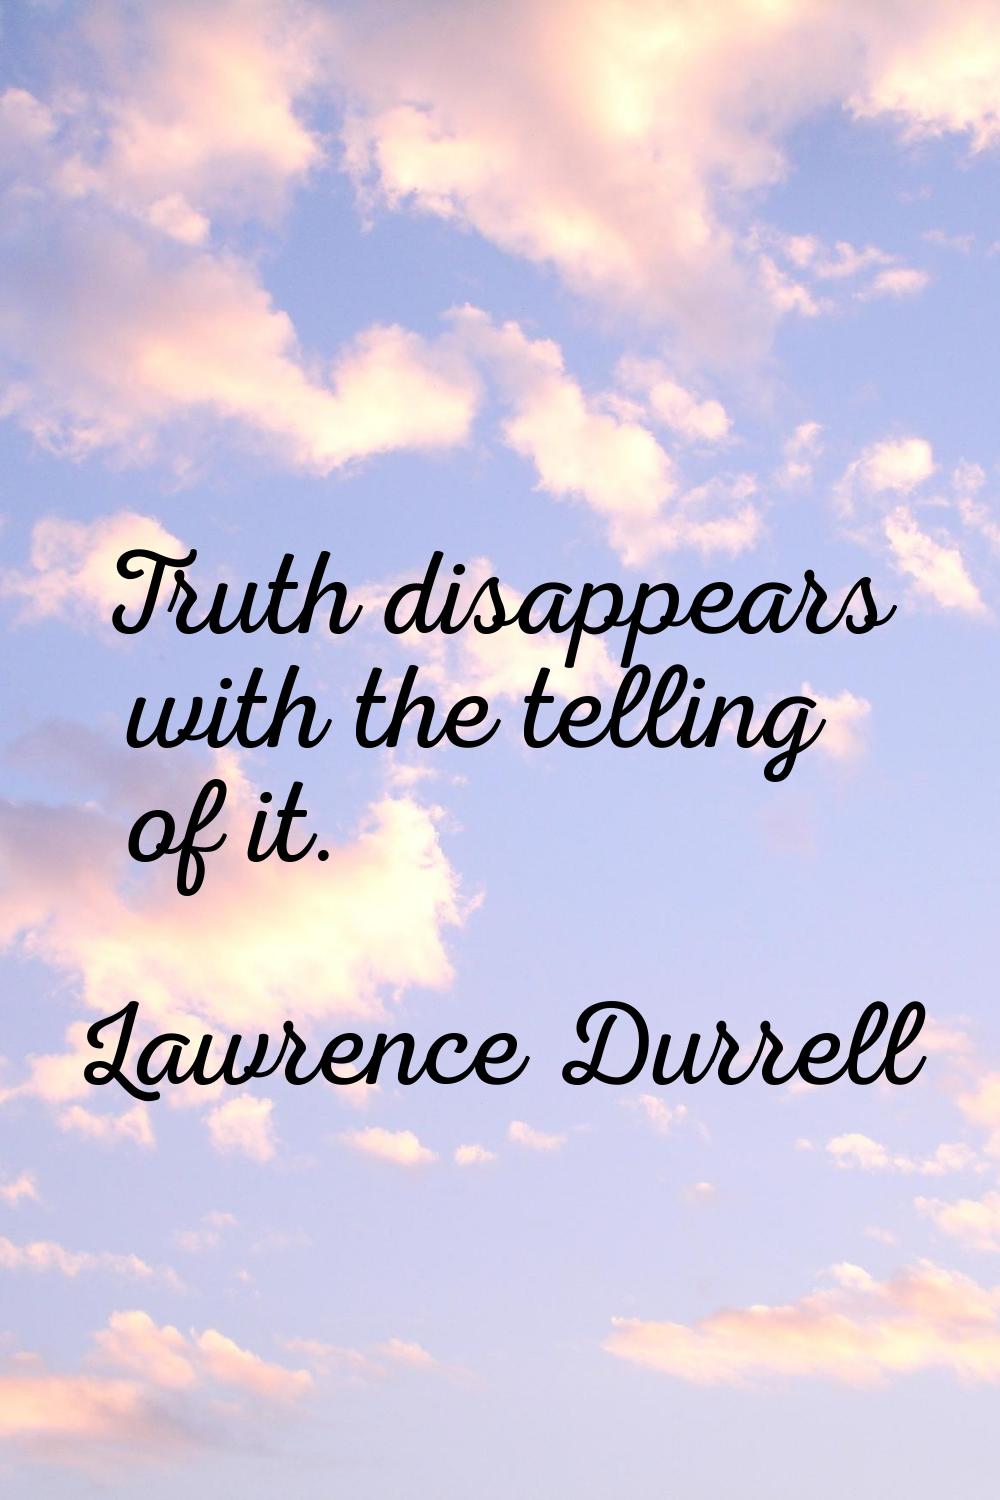 Truth disappears with the telling of it.